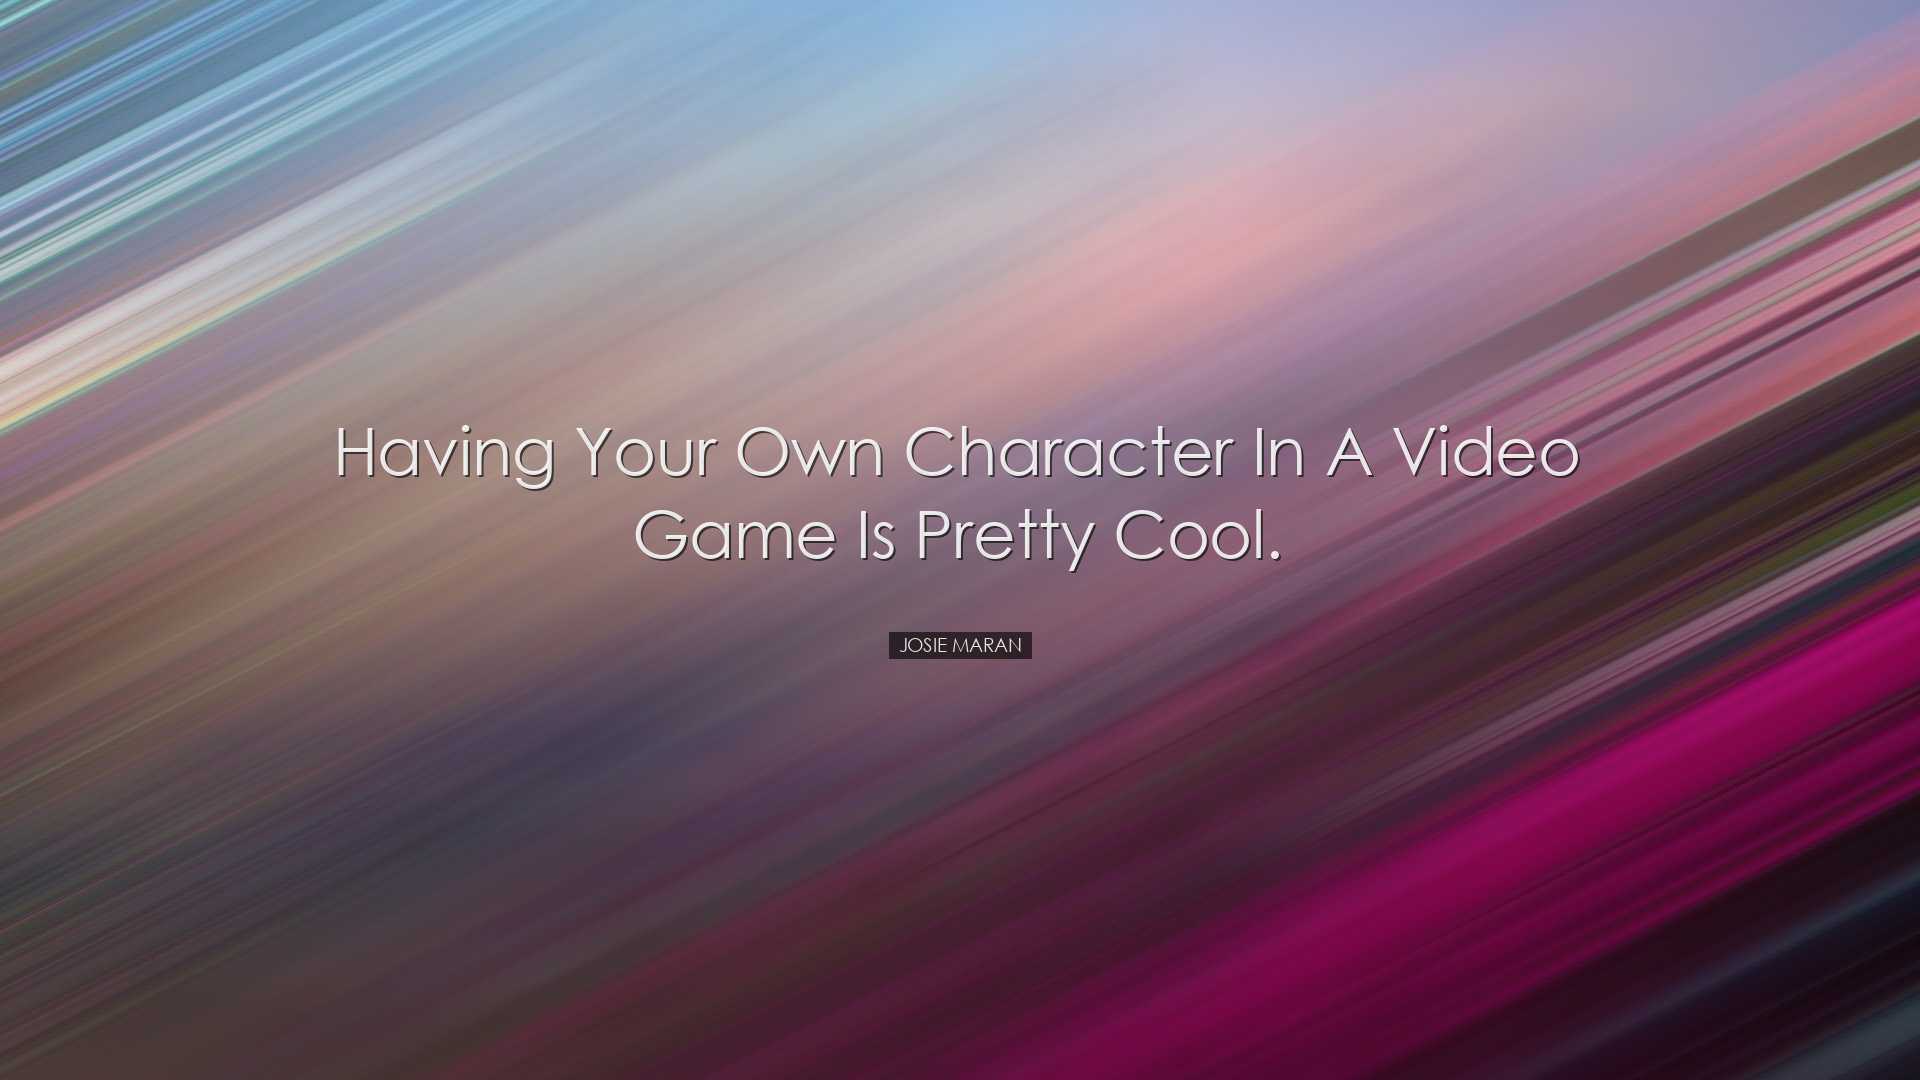 Having your own character in a video game is pretty cool. - Josie